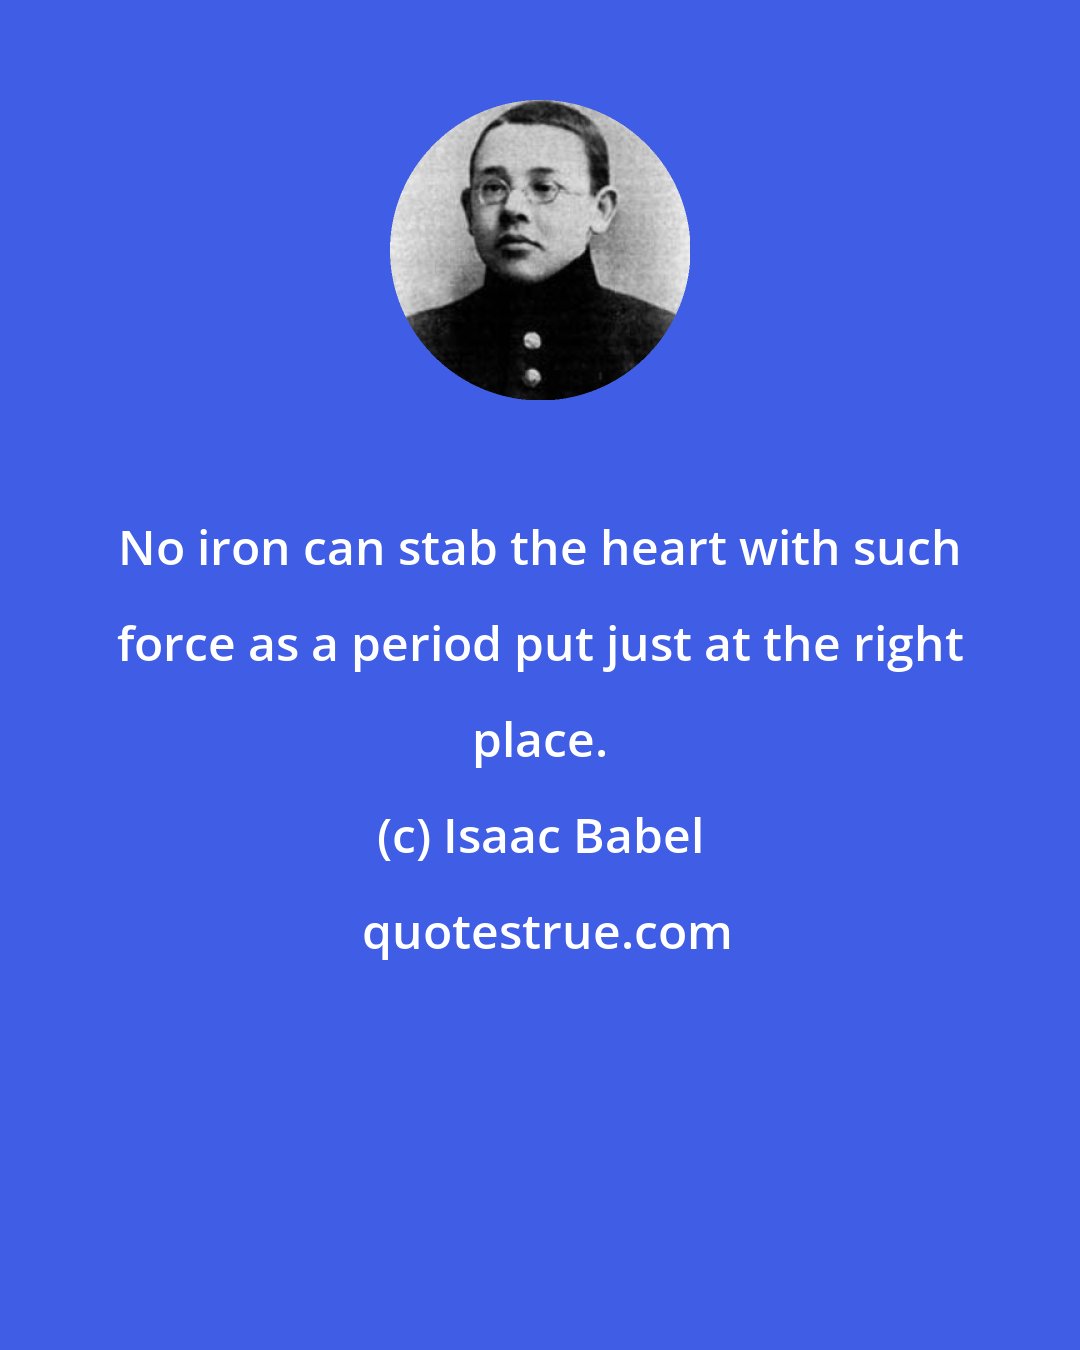 Isaac Babel: No iron can stab the heart with such force as a period put just at the right place.